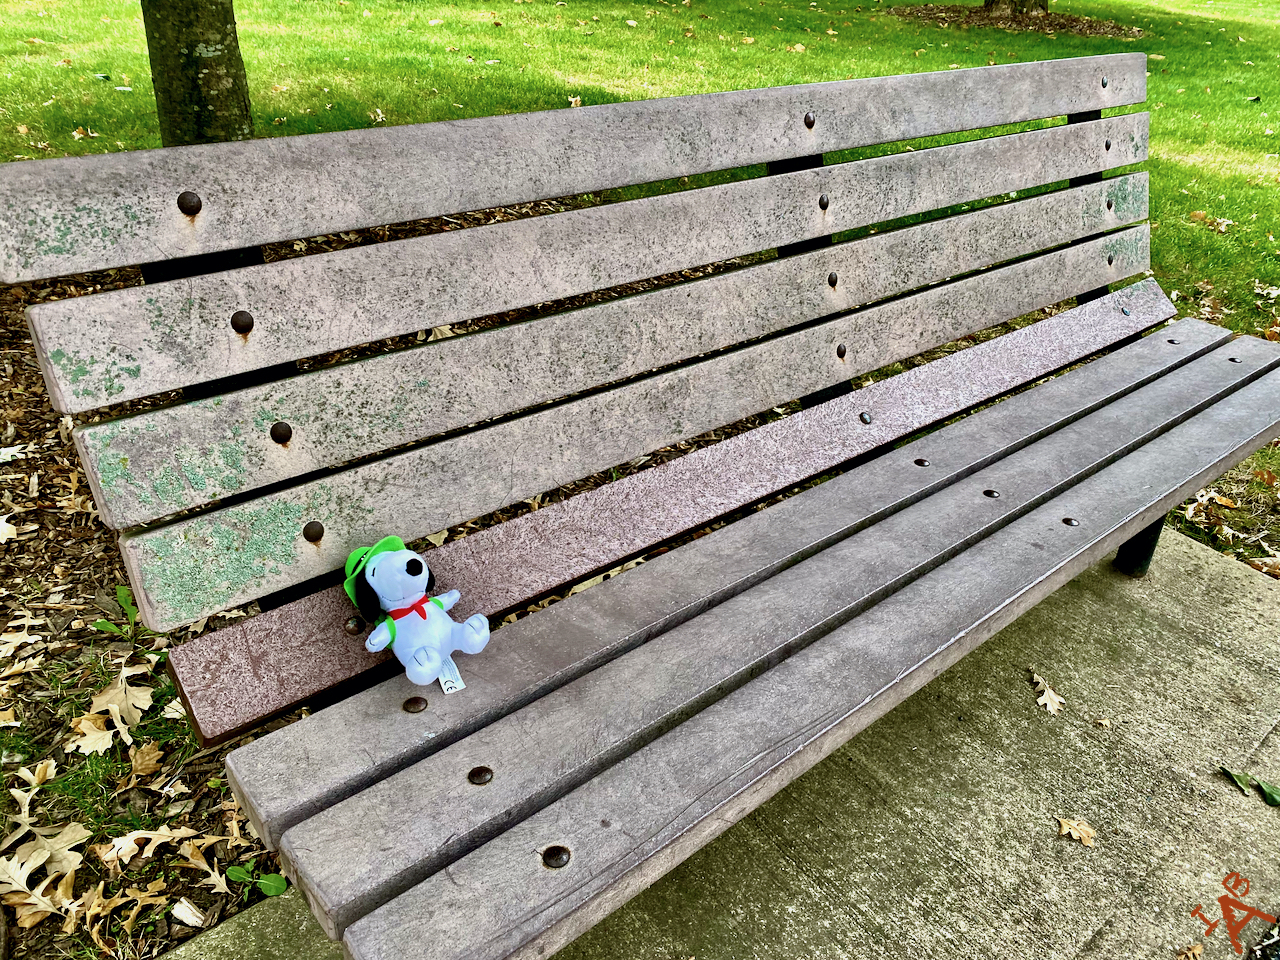 A Snoopy plush toy sits all alone on a park bench.